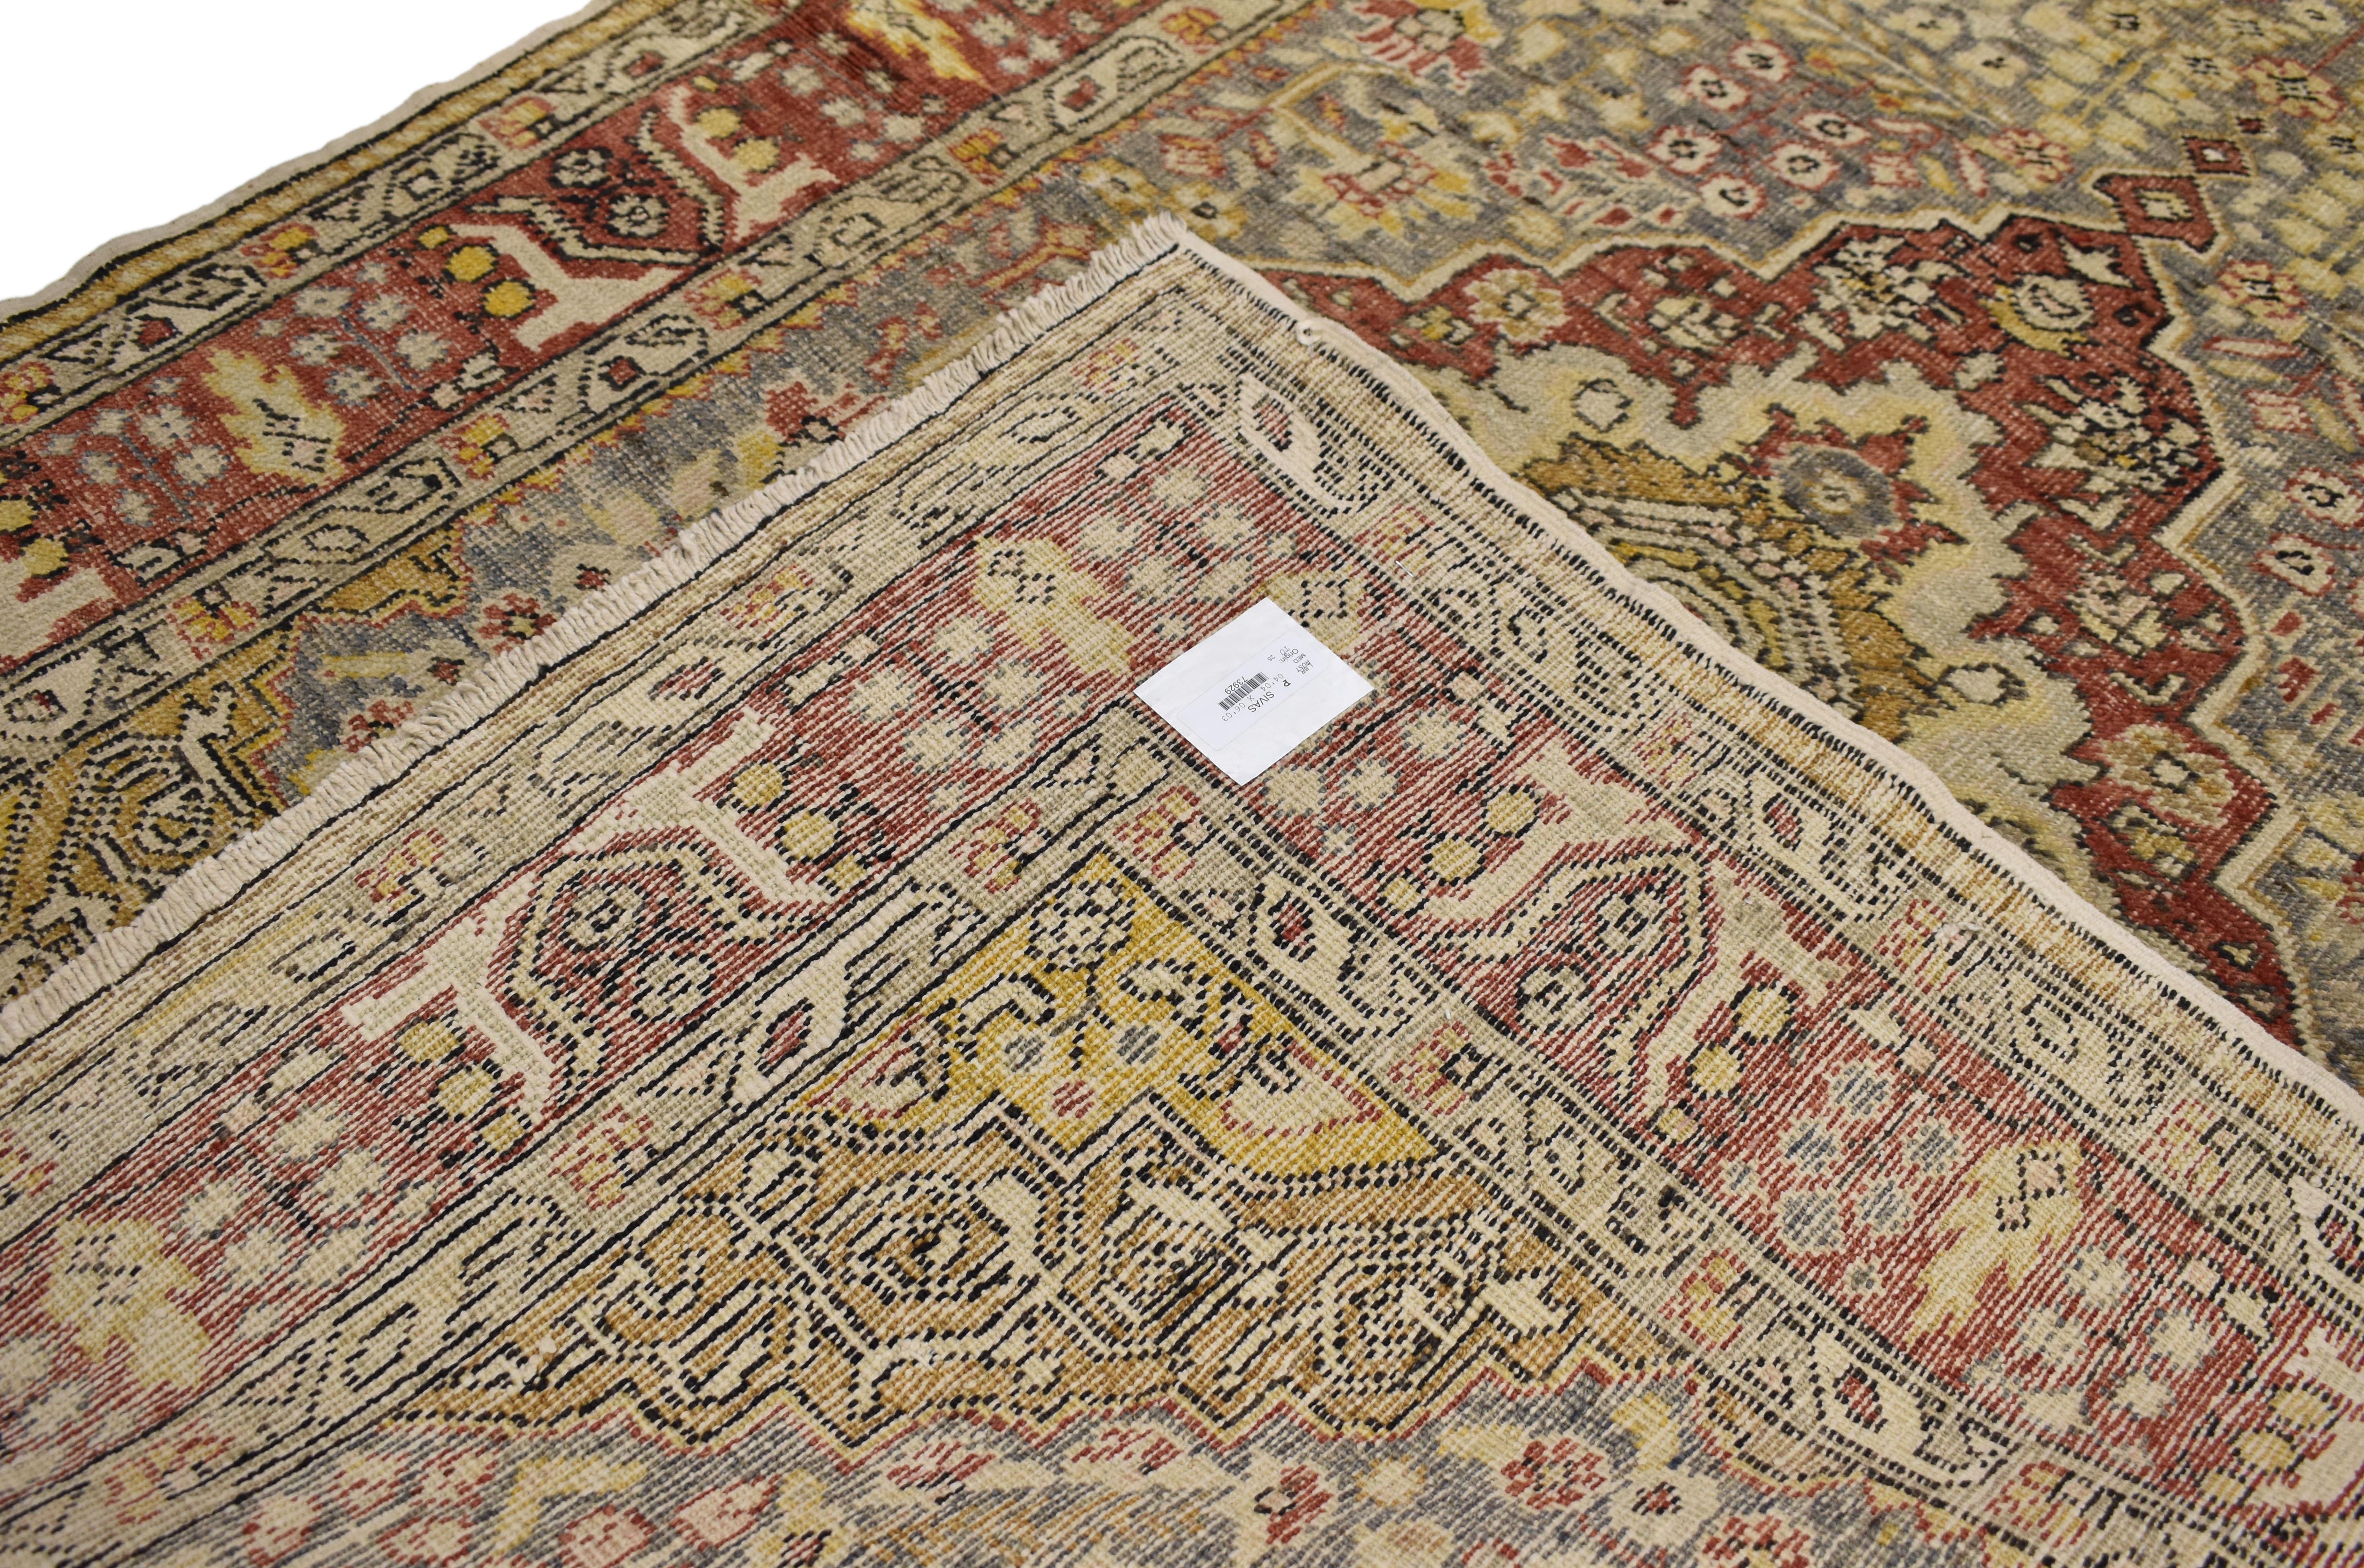 Modern Rustic Style Vintage Turkish Sivas Rug, Entry or Foyer Rug In Good Condition For Sale In Dallas, TX